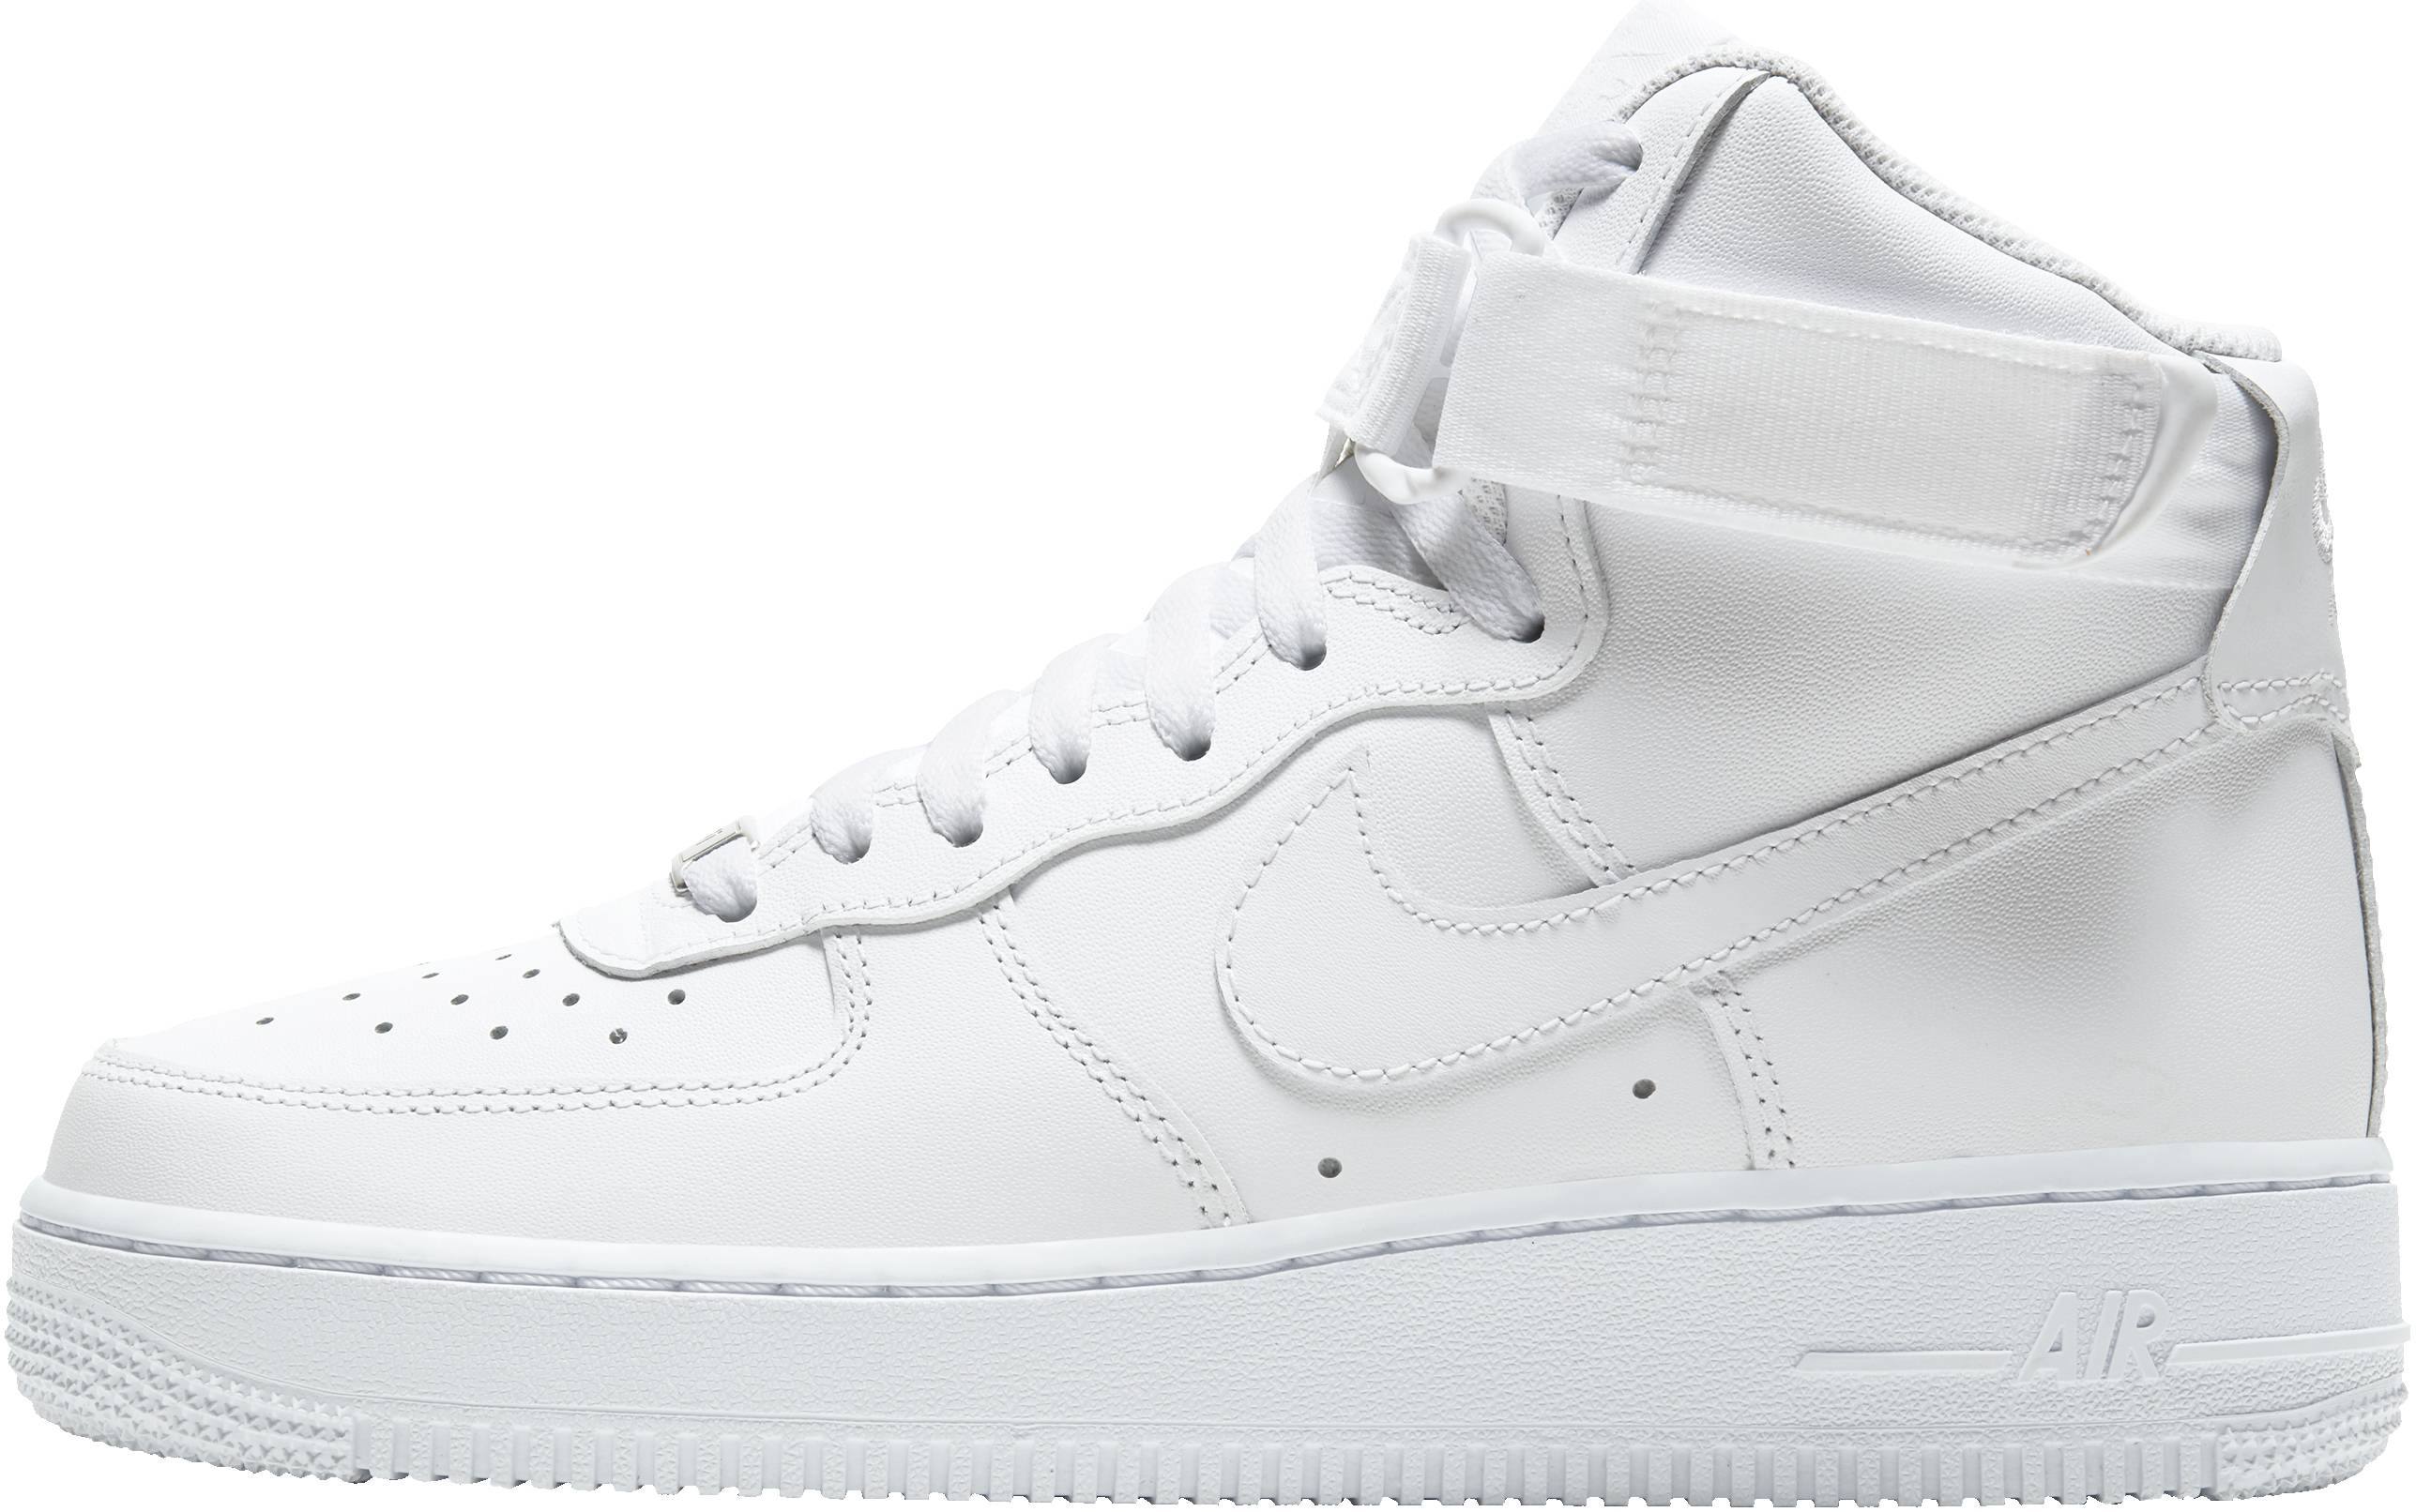 Save 17% on Nike Air Force 1 Sneakers 